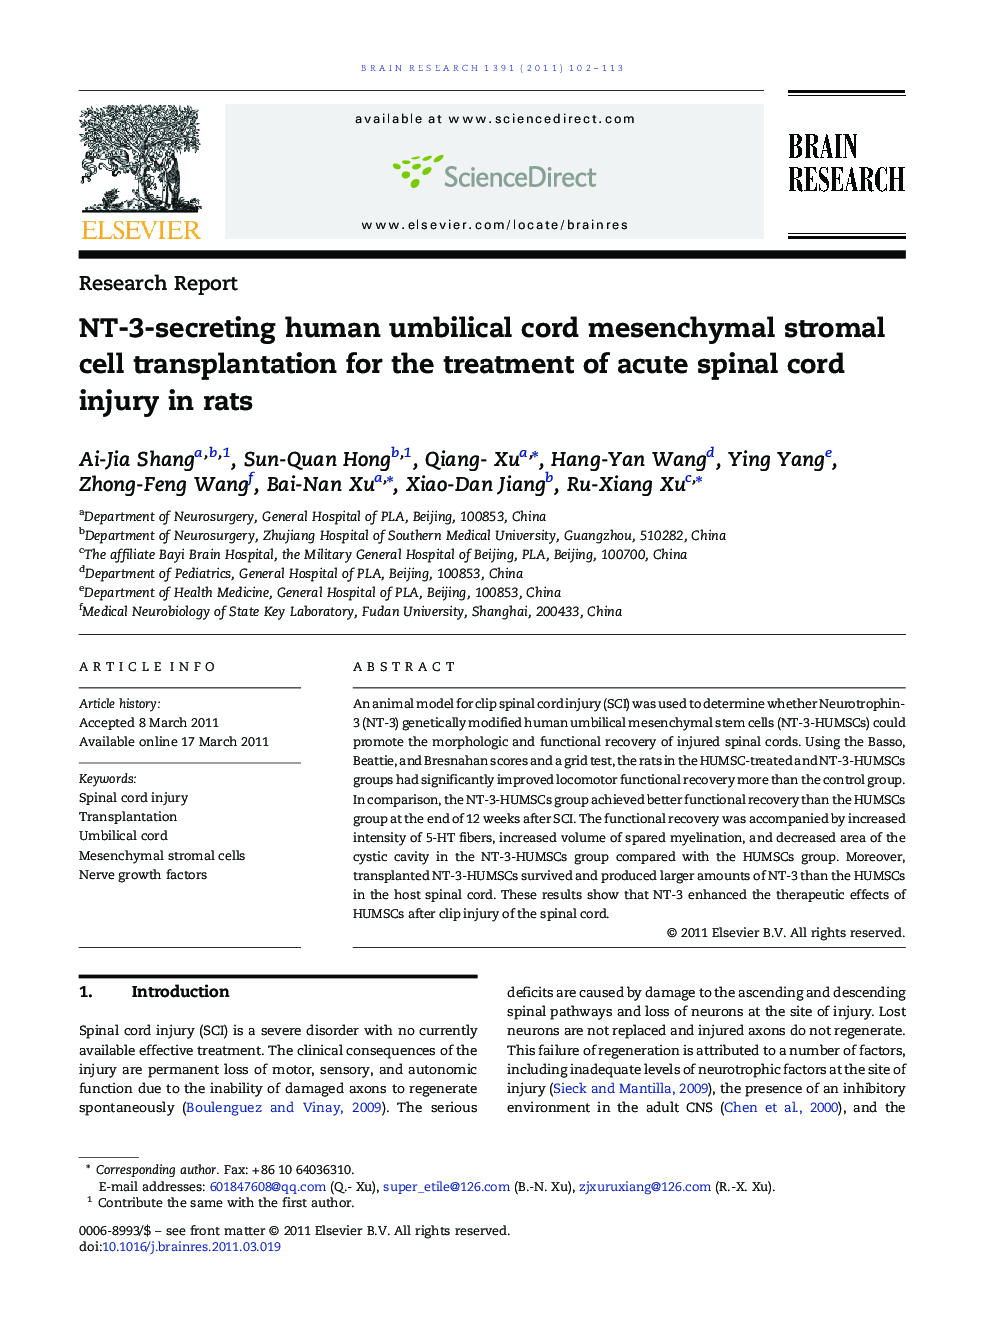 NT-3-secreting human umbilical cord mesenchymal stromal cell transplantation for the treatment of acute spinal cord injury in rats